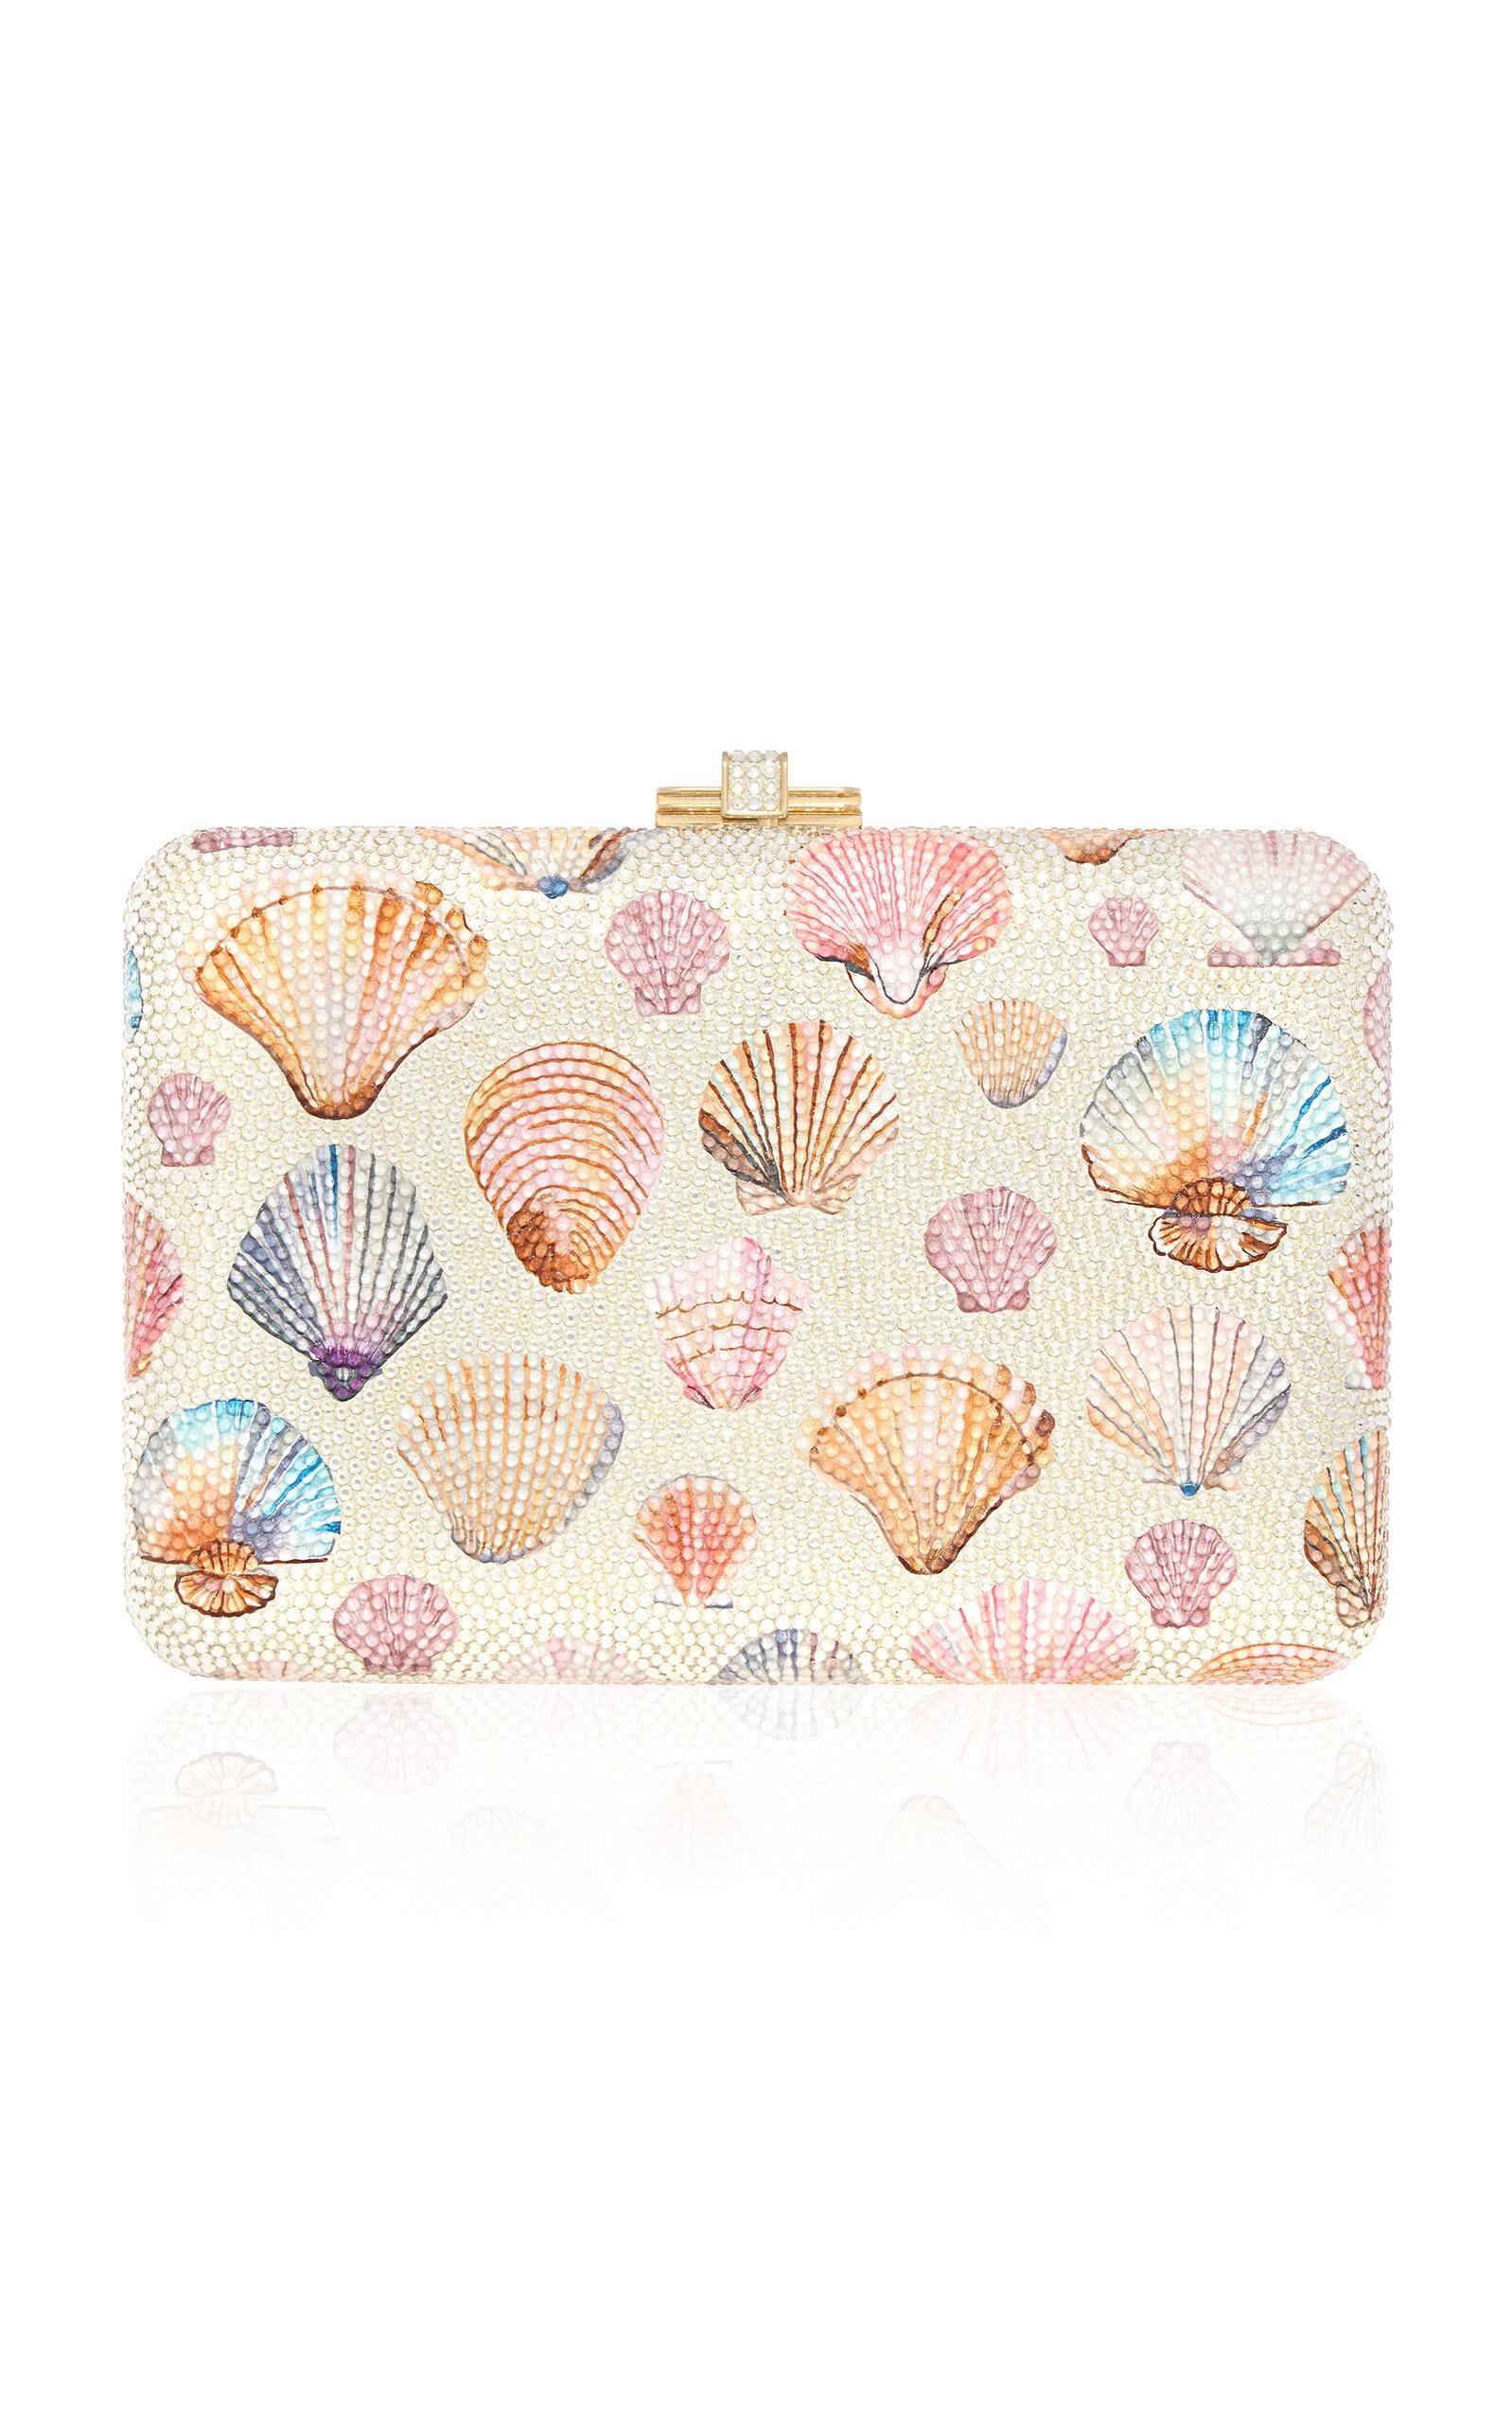 Judith Leiber Couture - Beachcomber Crystal Clutch - Multi - OS - Only At Moda Operandi by JUDITH LEIBER COUTURE